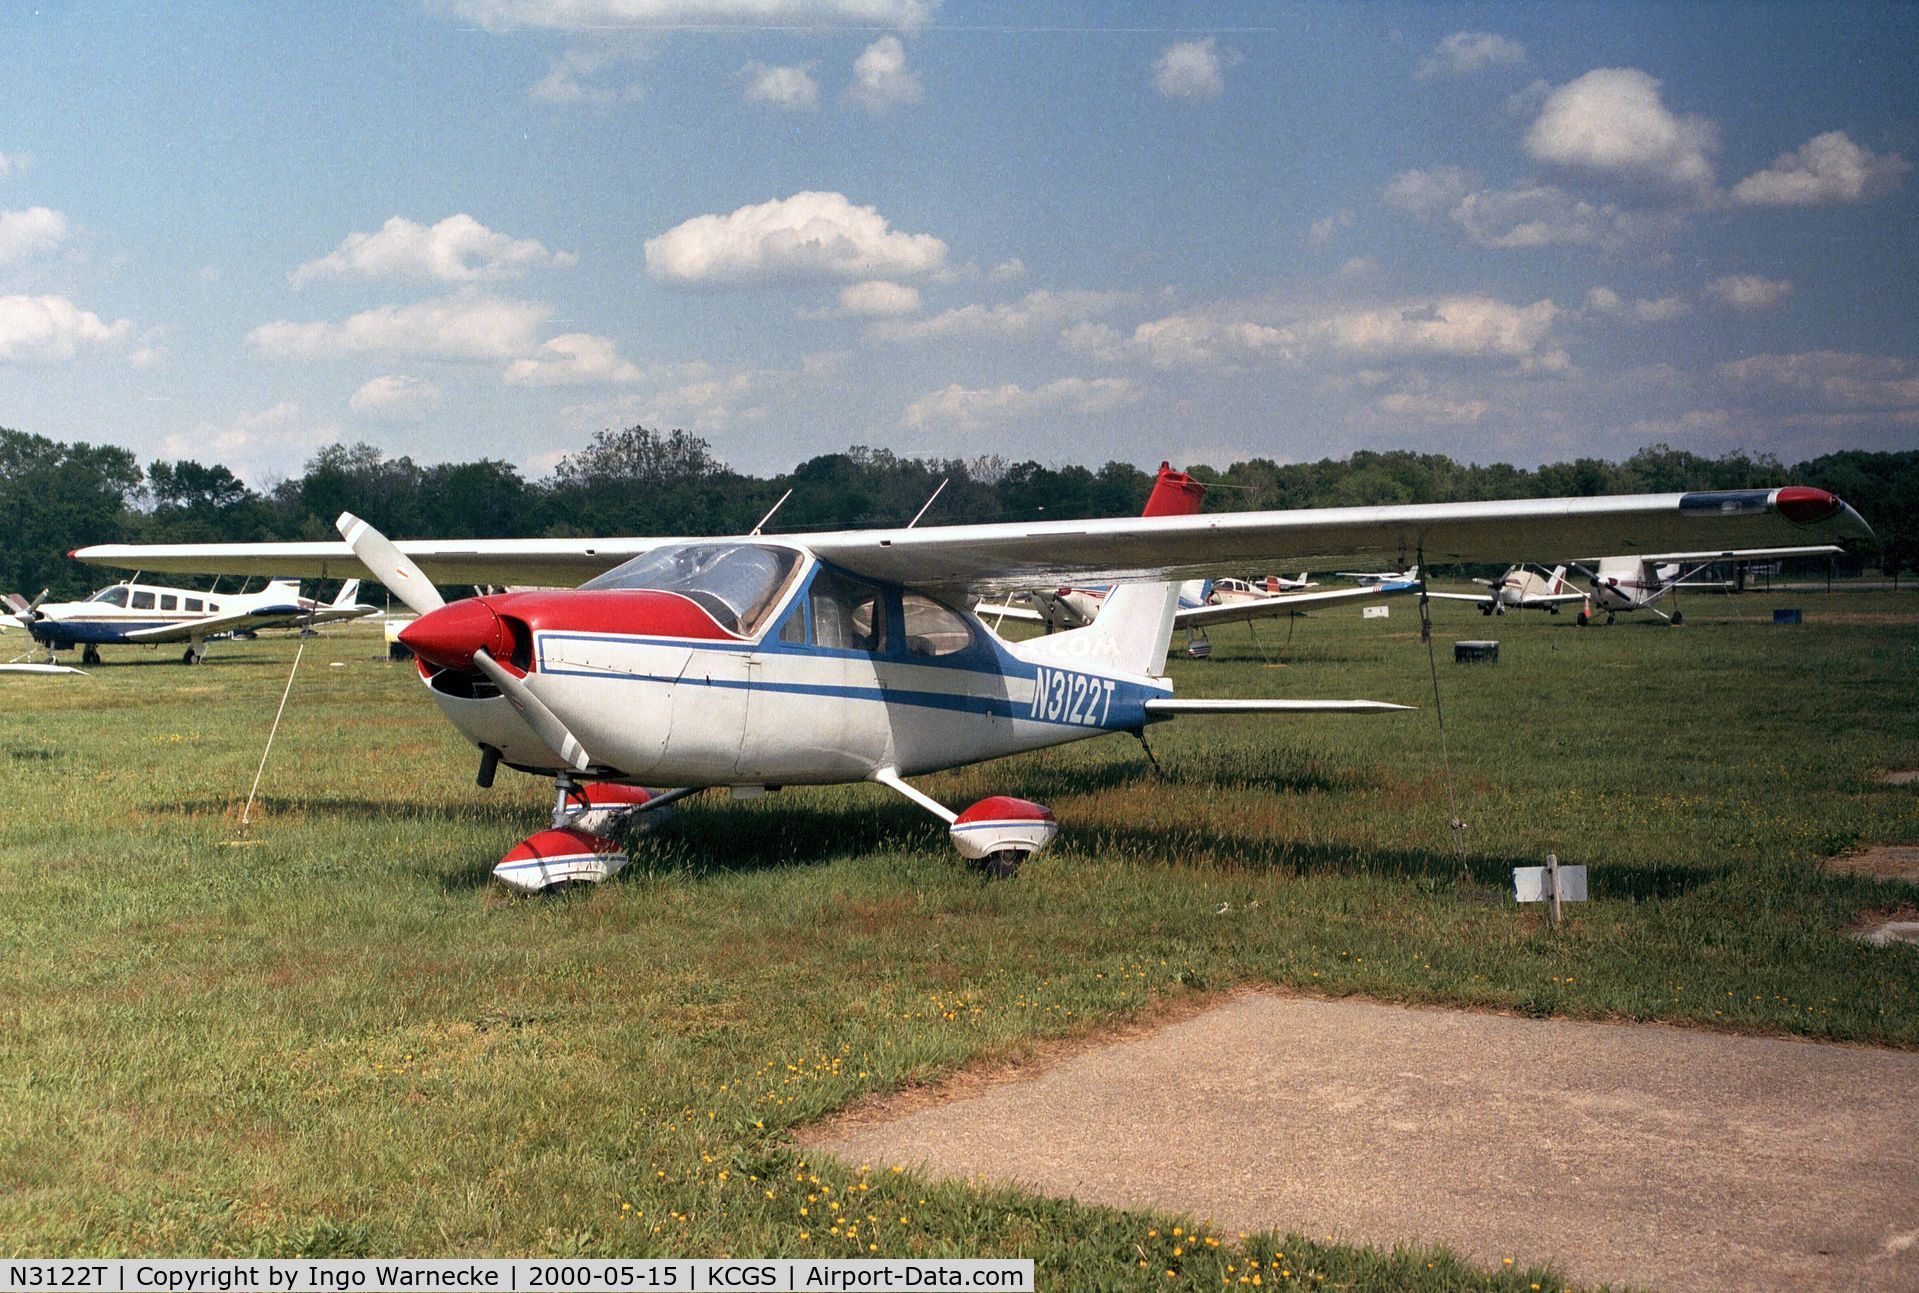 N3122T, 1967 Cessna 177 Cardinal C/N 17700422, Cessna 177 Cardinal at College Park MD airfield